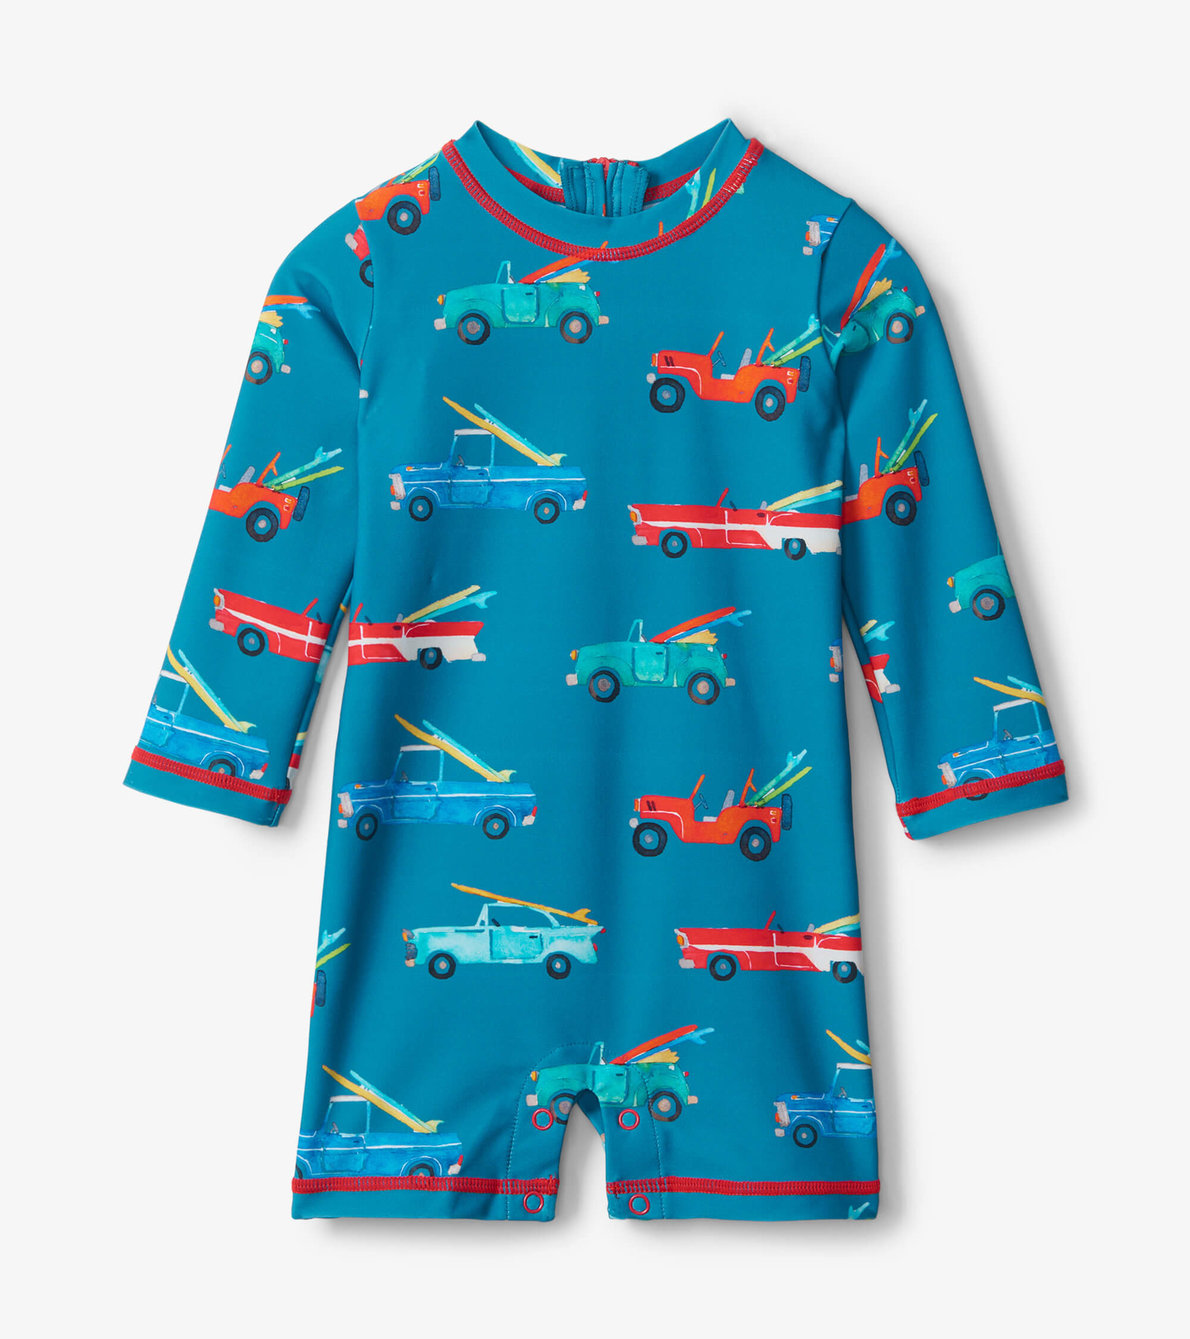 View larger image of Surf Cars Baby One-Piece Rashguard